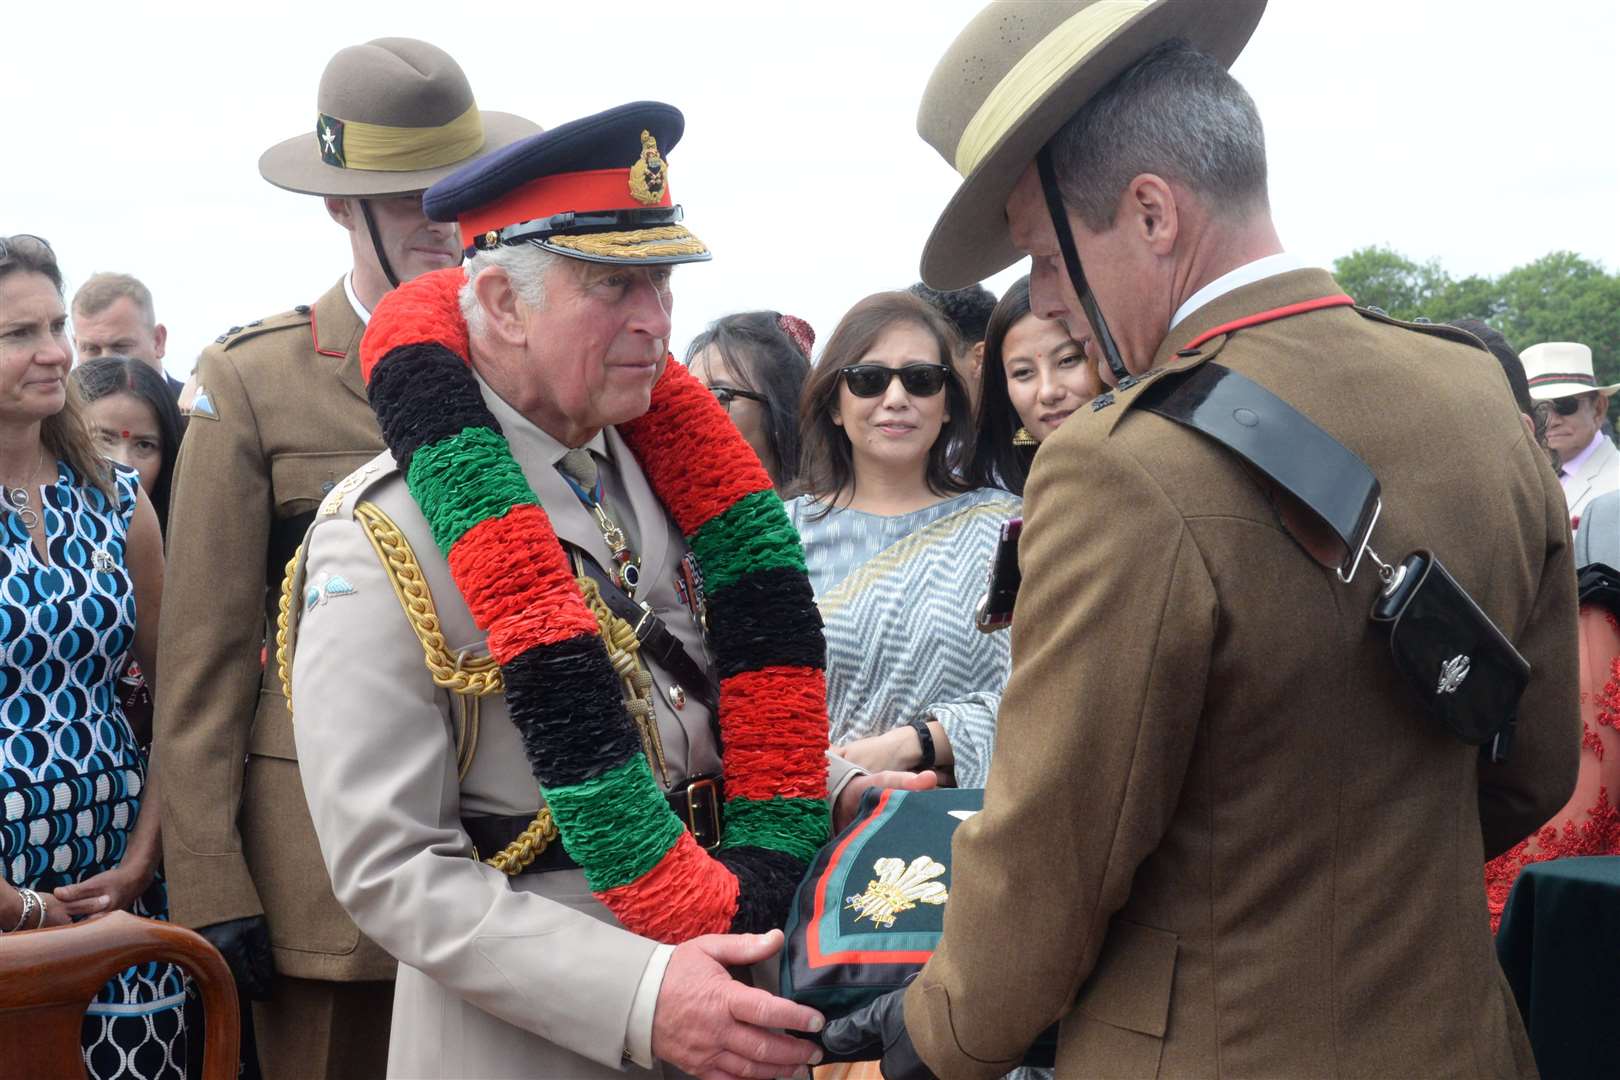 HRH was presented with a cushion at the end of his visit. Picture: Chris Davey